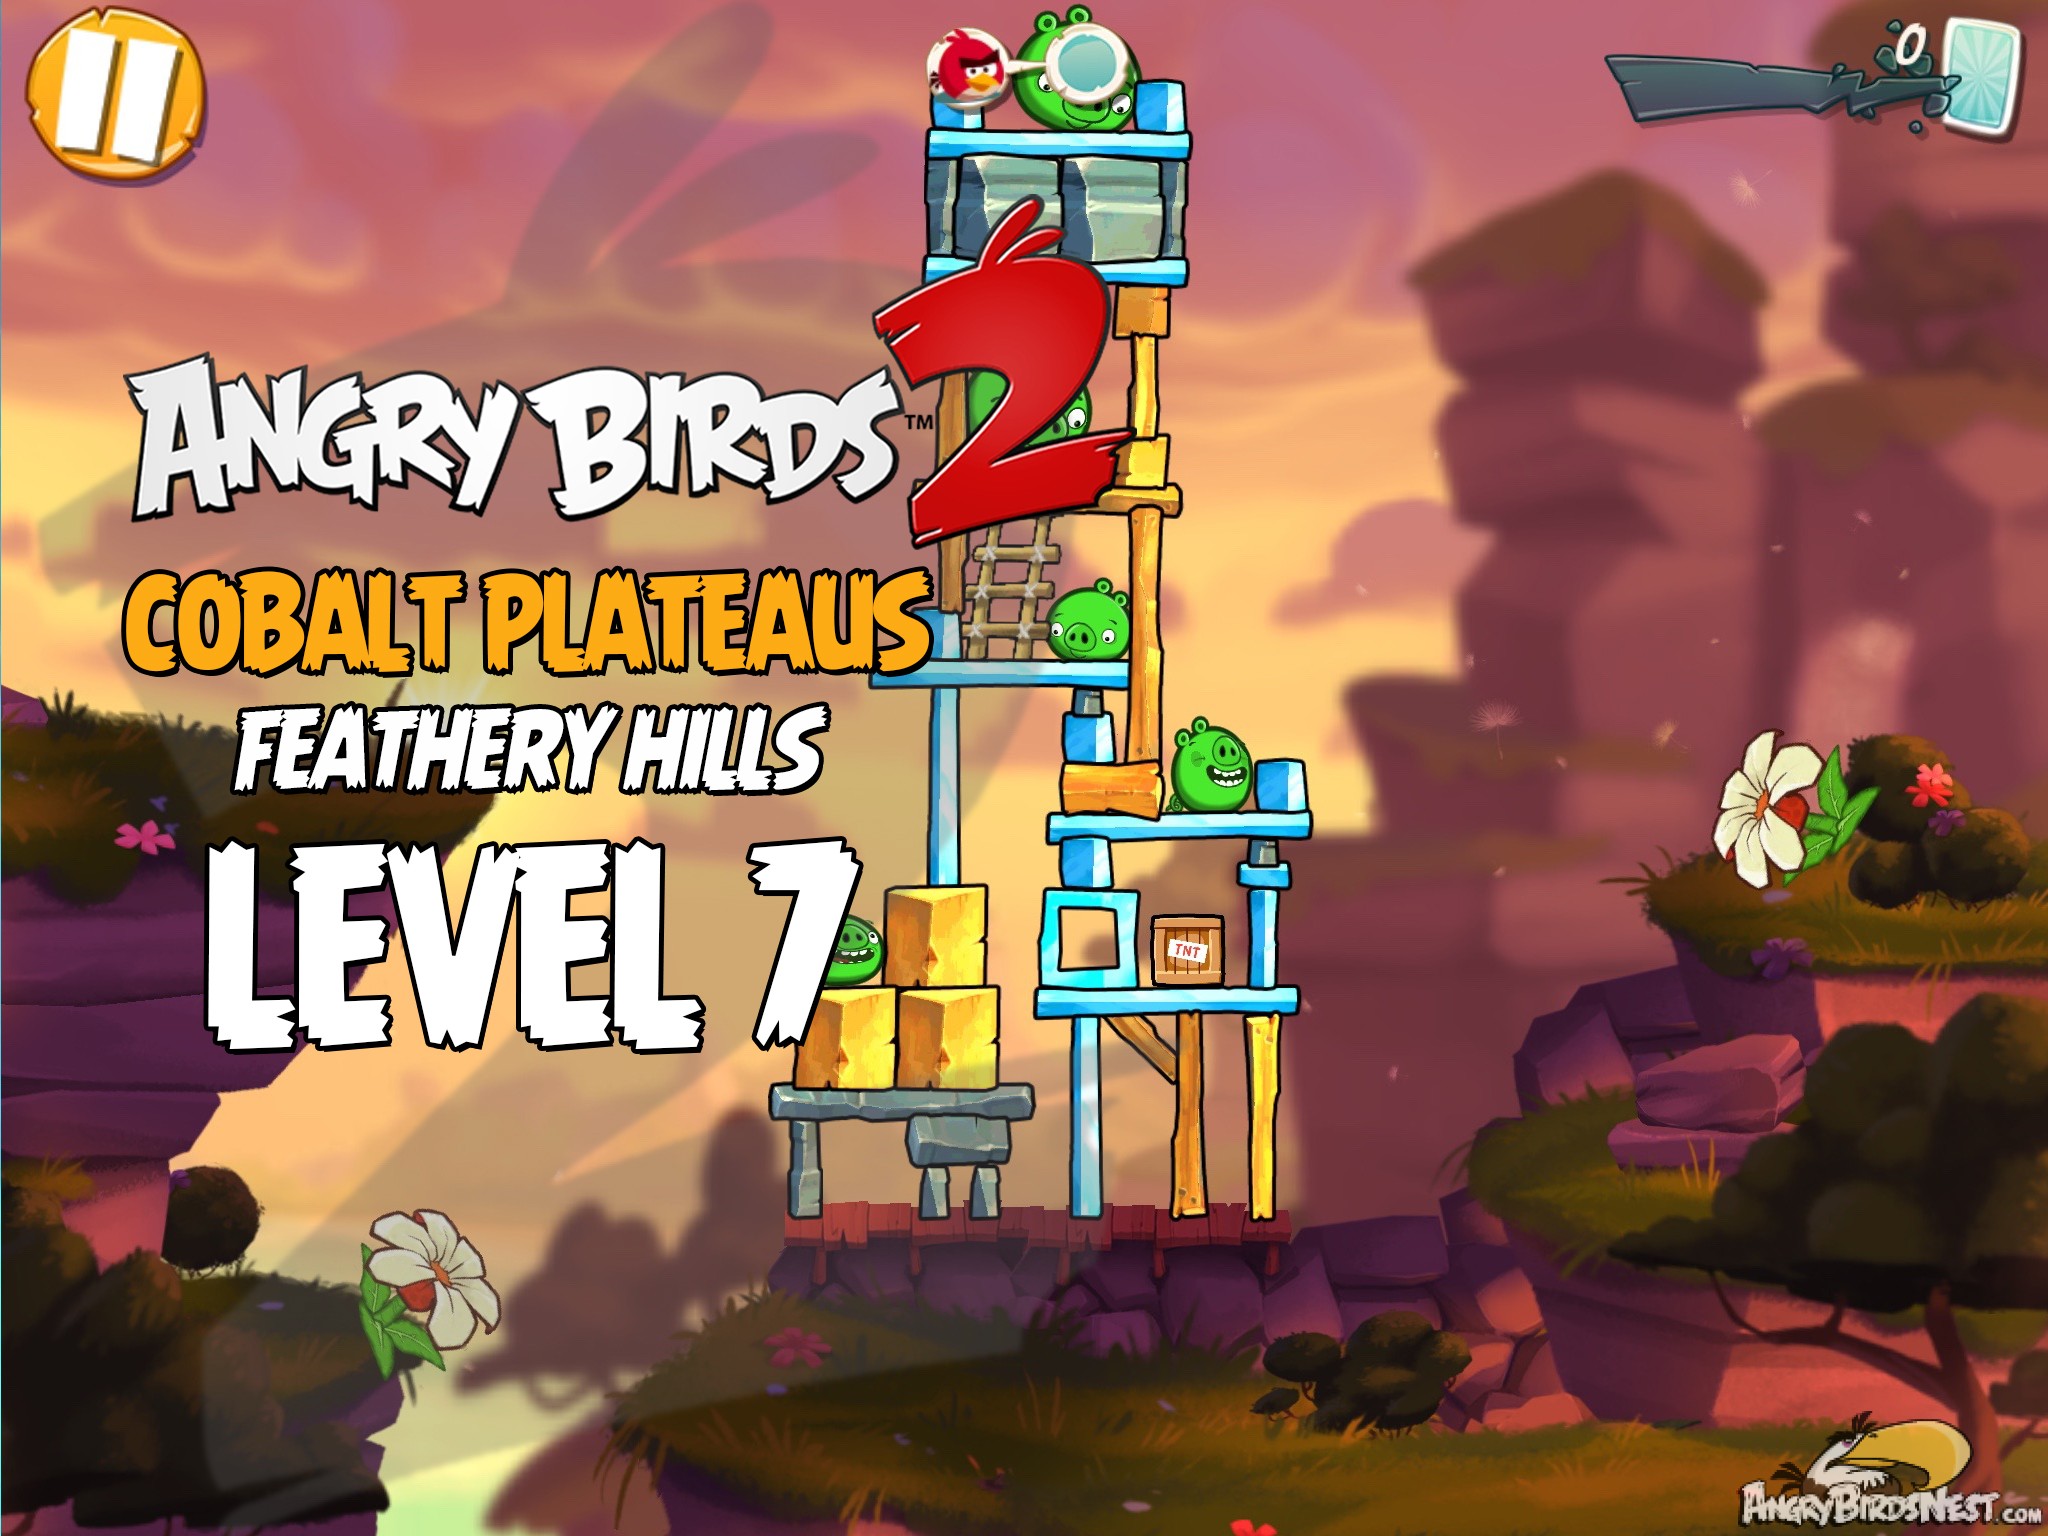 Angry Birds 2 Cobalt Plateaus Feathery Hills Level 7